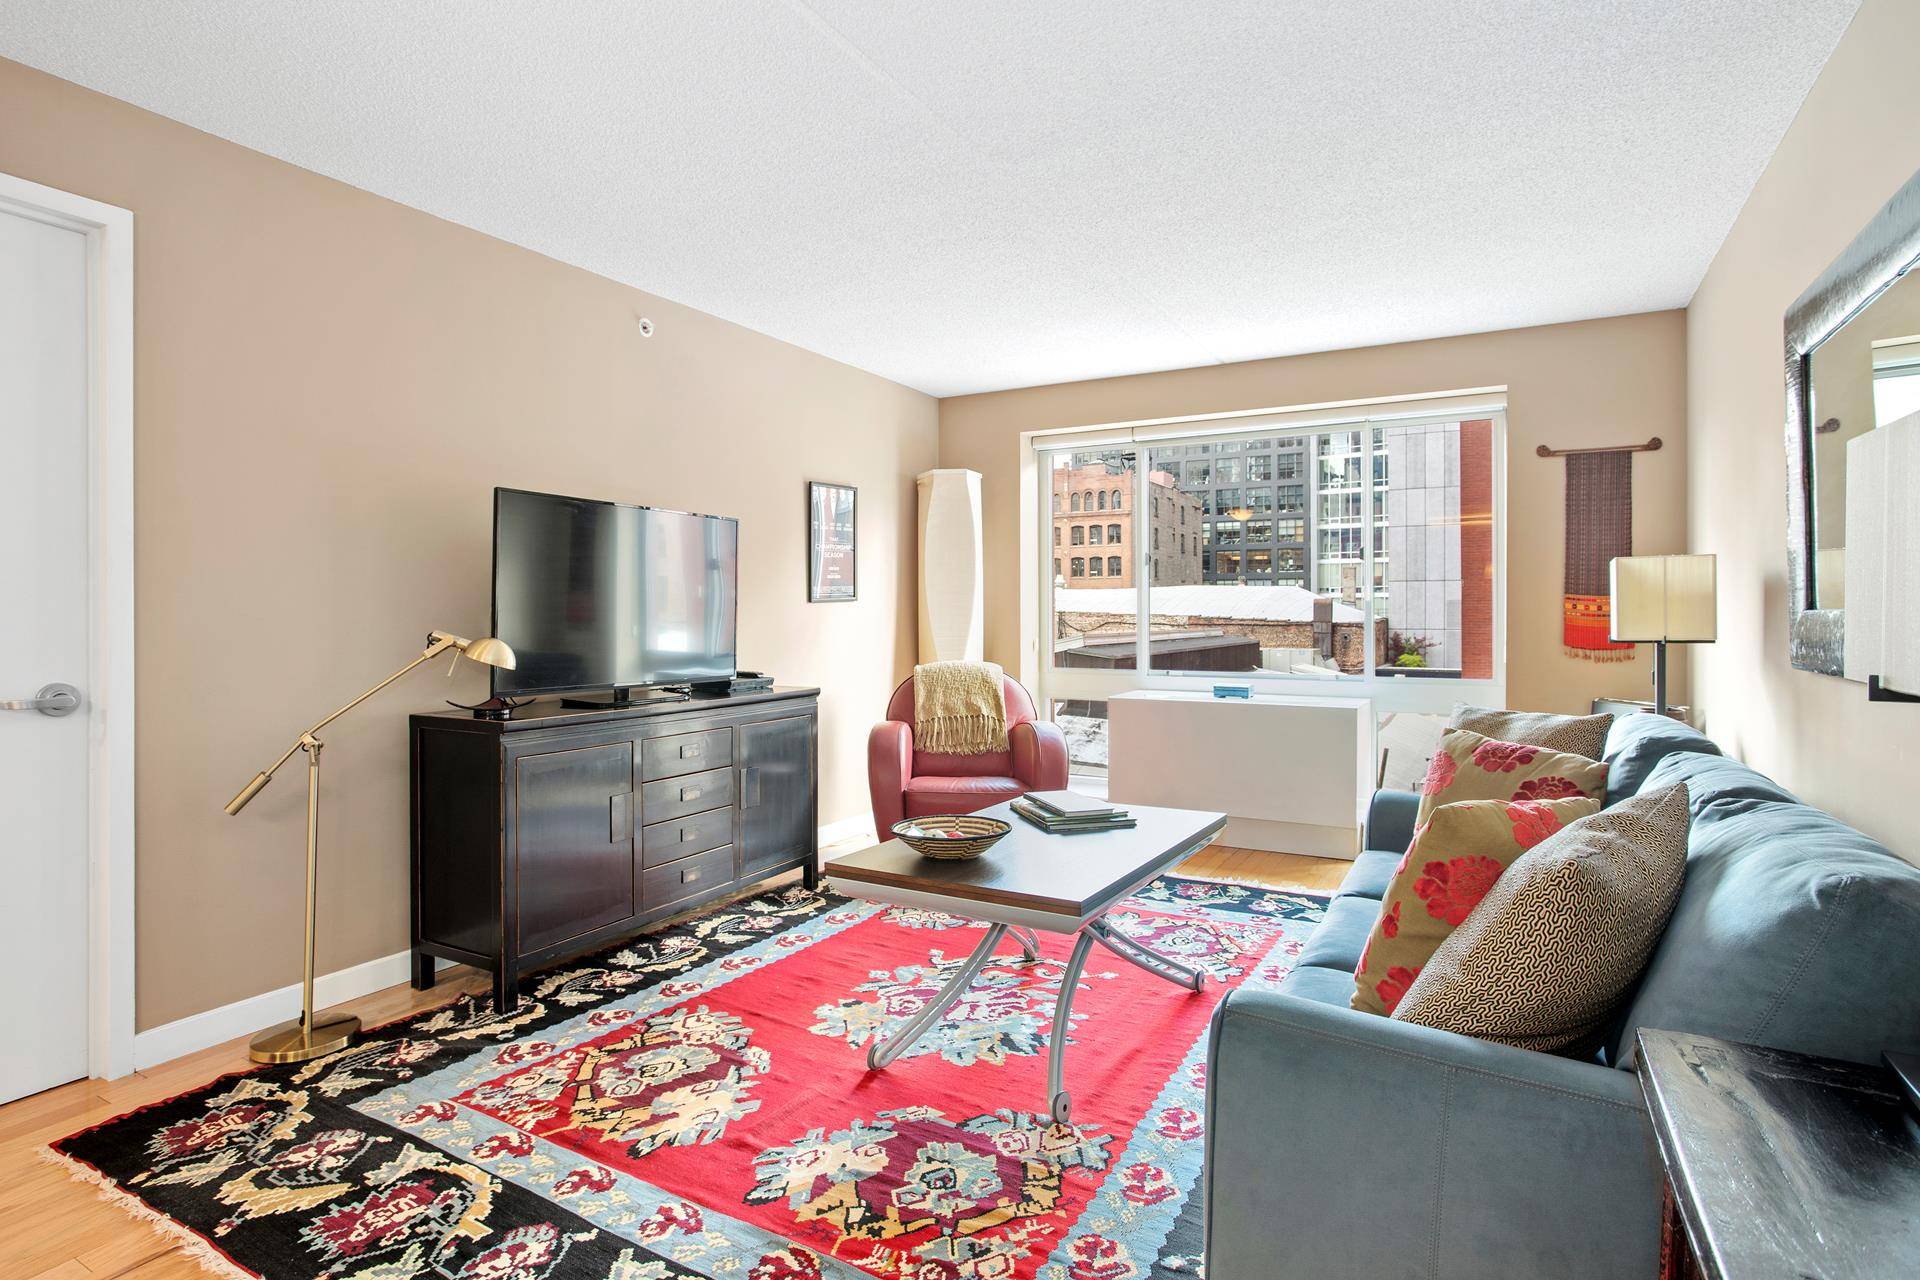 Bring offers ! This pristine one bedroom, one bathroom condominium is situated in the most popular area of Chelsea and in a full service, luxury building.